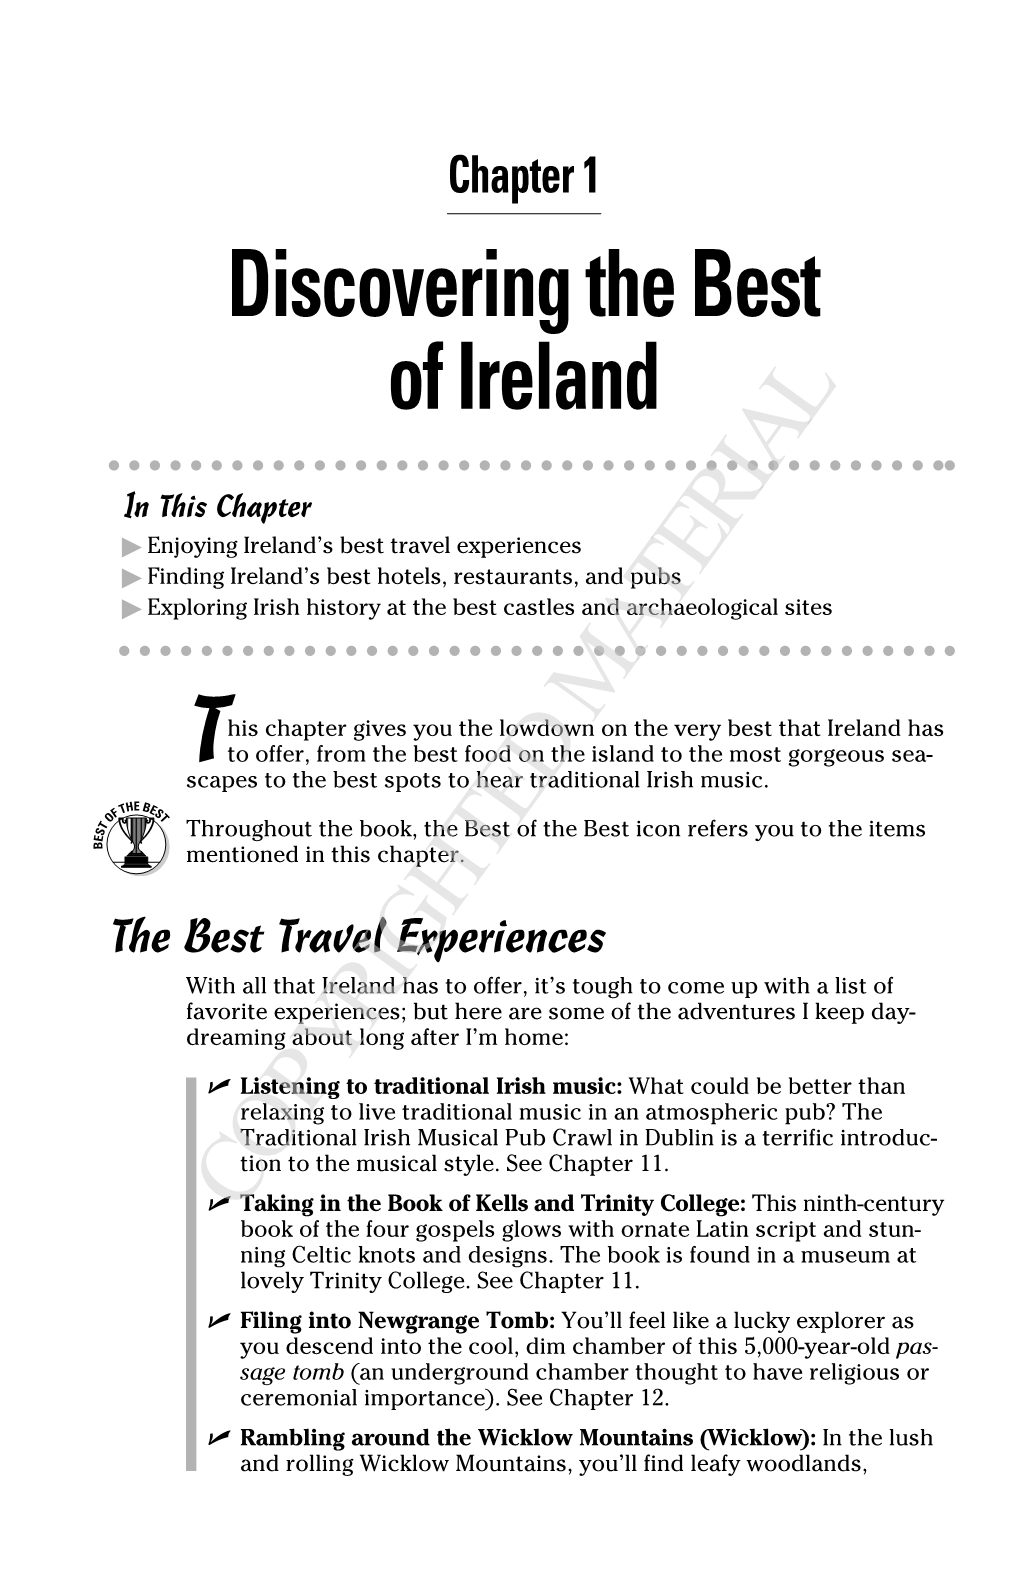 Discovering the Best of Ireland